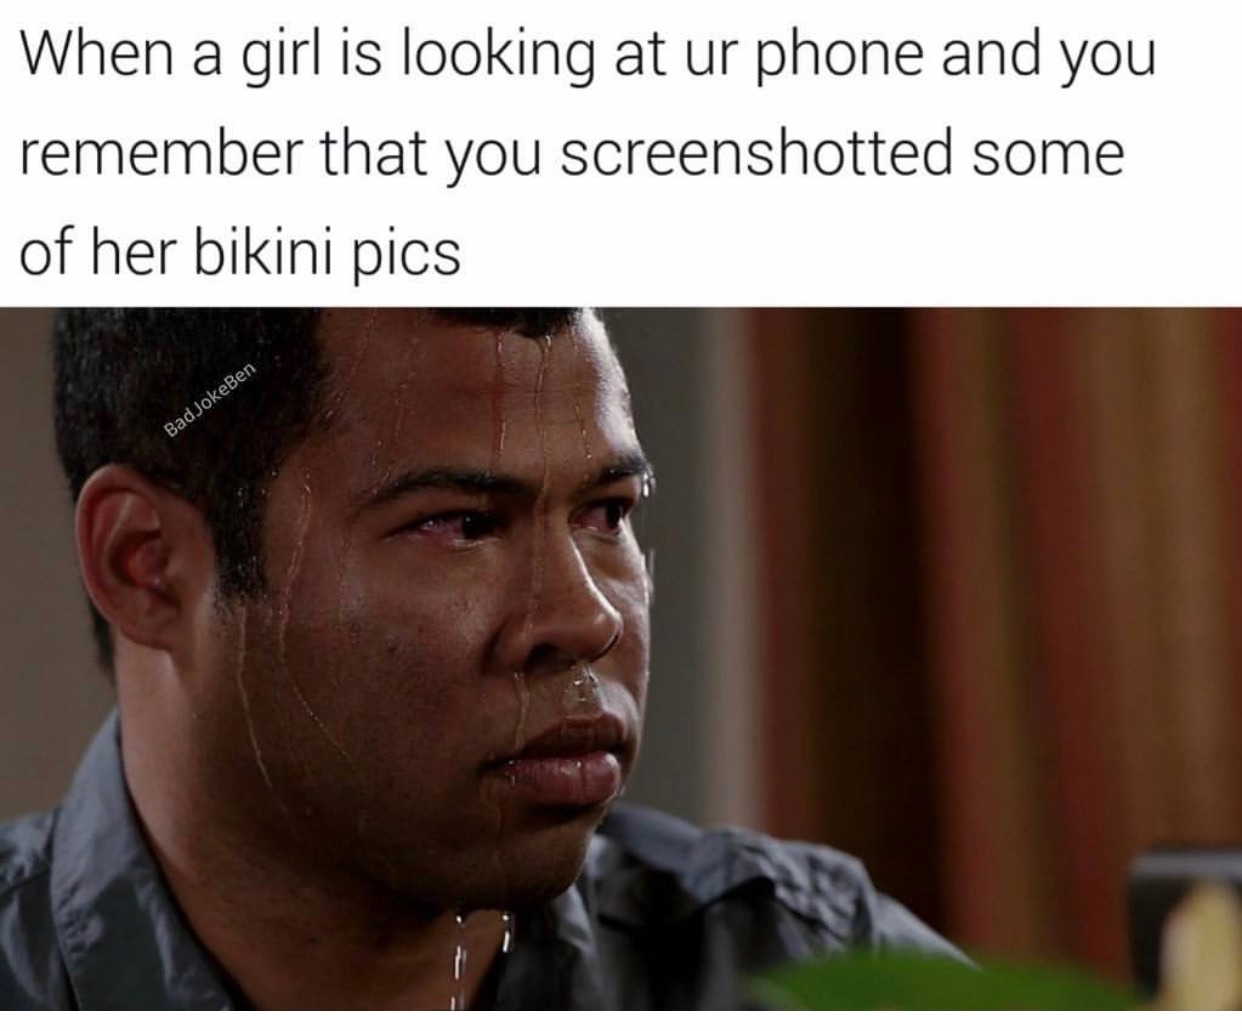 memes - nervous black man meme - When a girl is looking at ur phone and you remember that you screenshotted some of her bikini pics Bad JokeBen